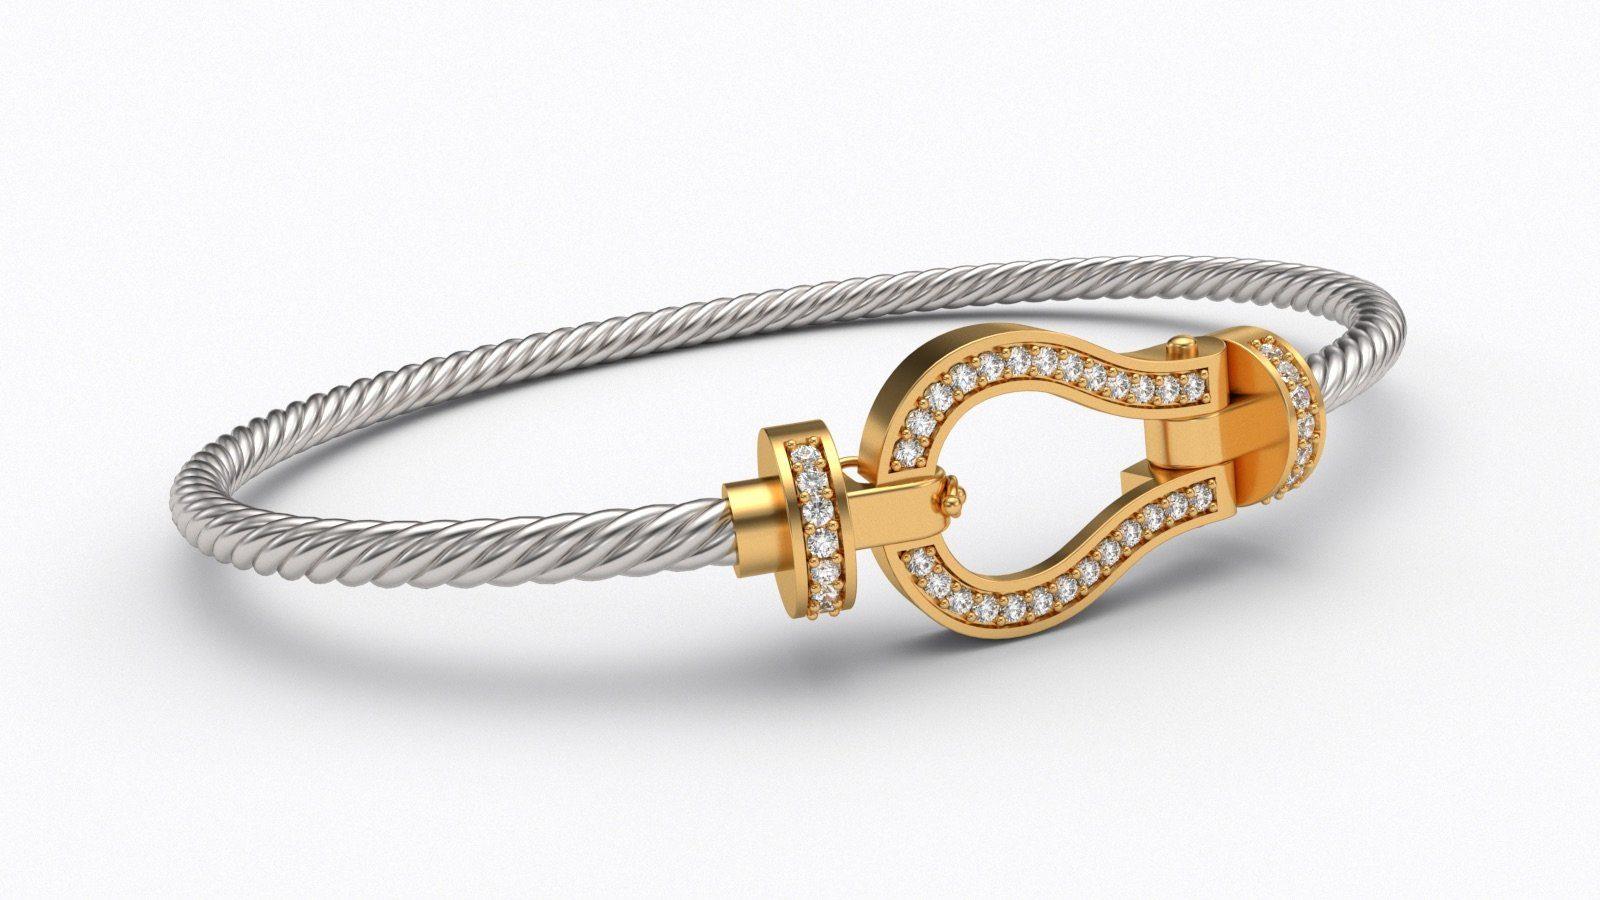 Cable and Diamond Bracelet 10K Gold - Thenetjeweler